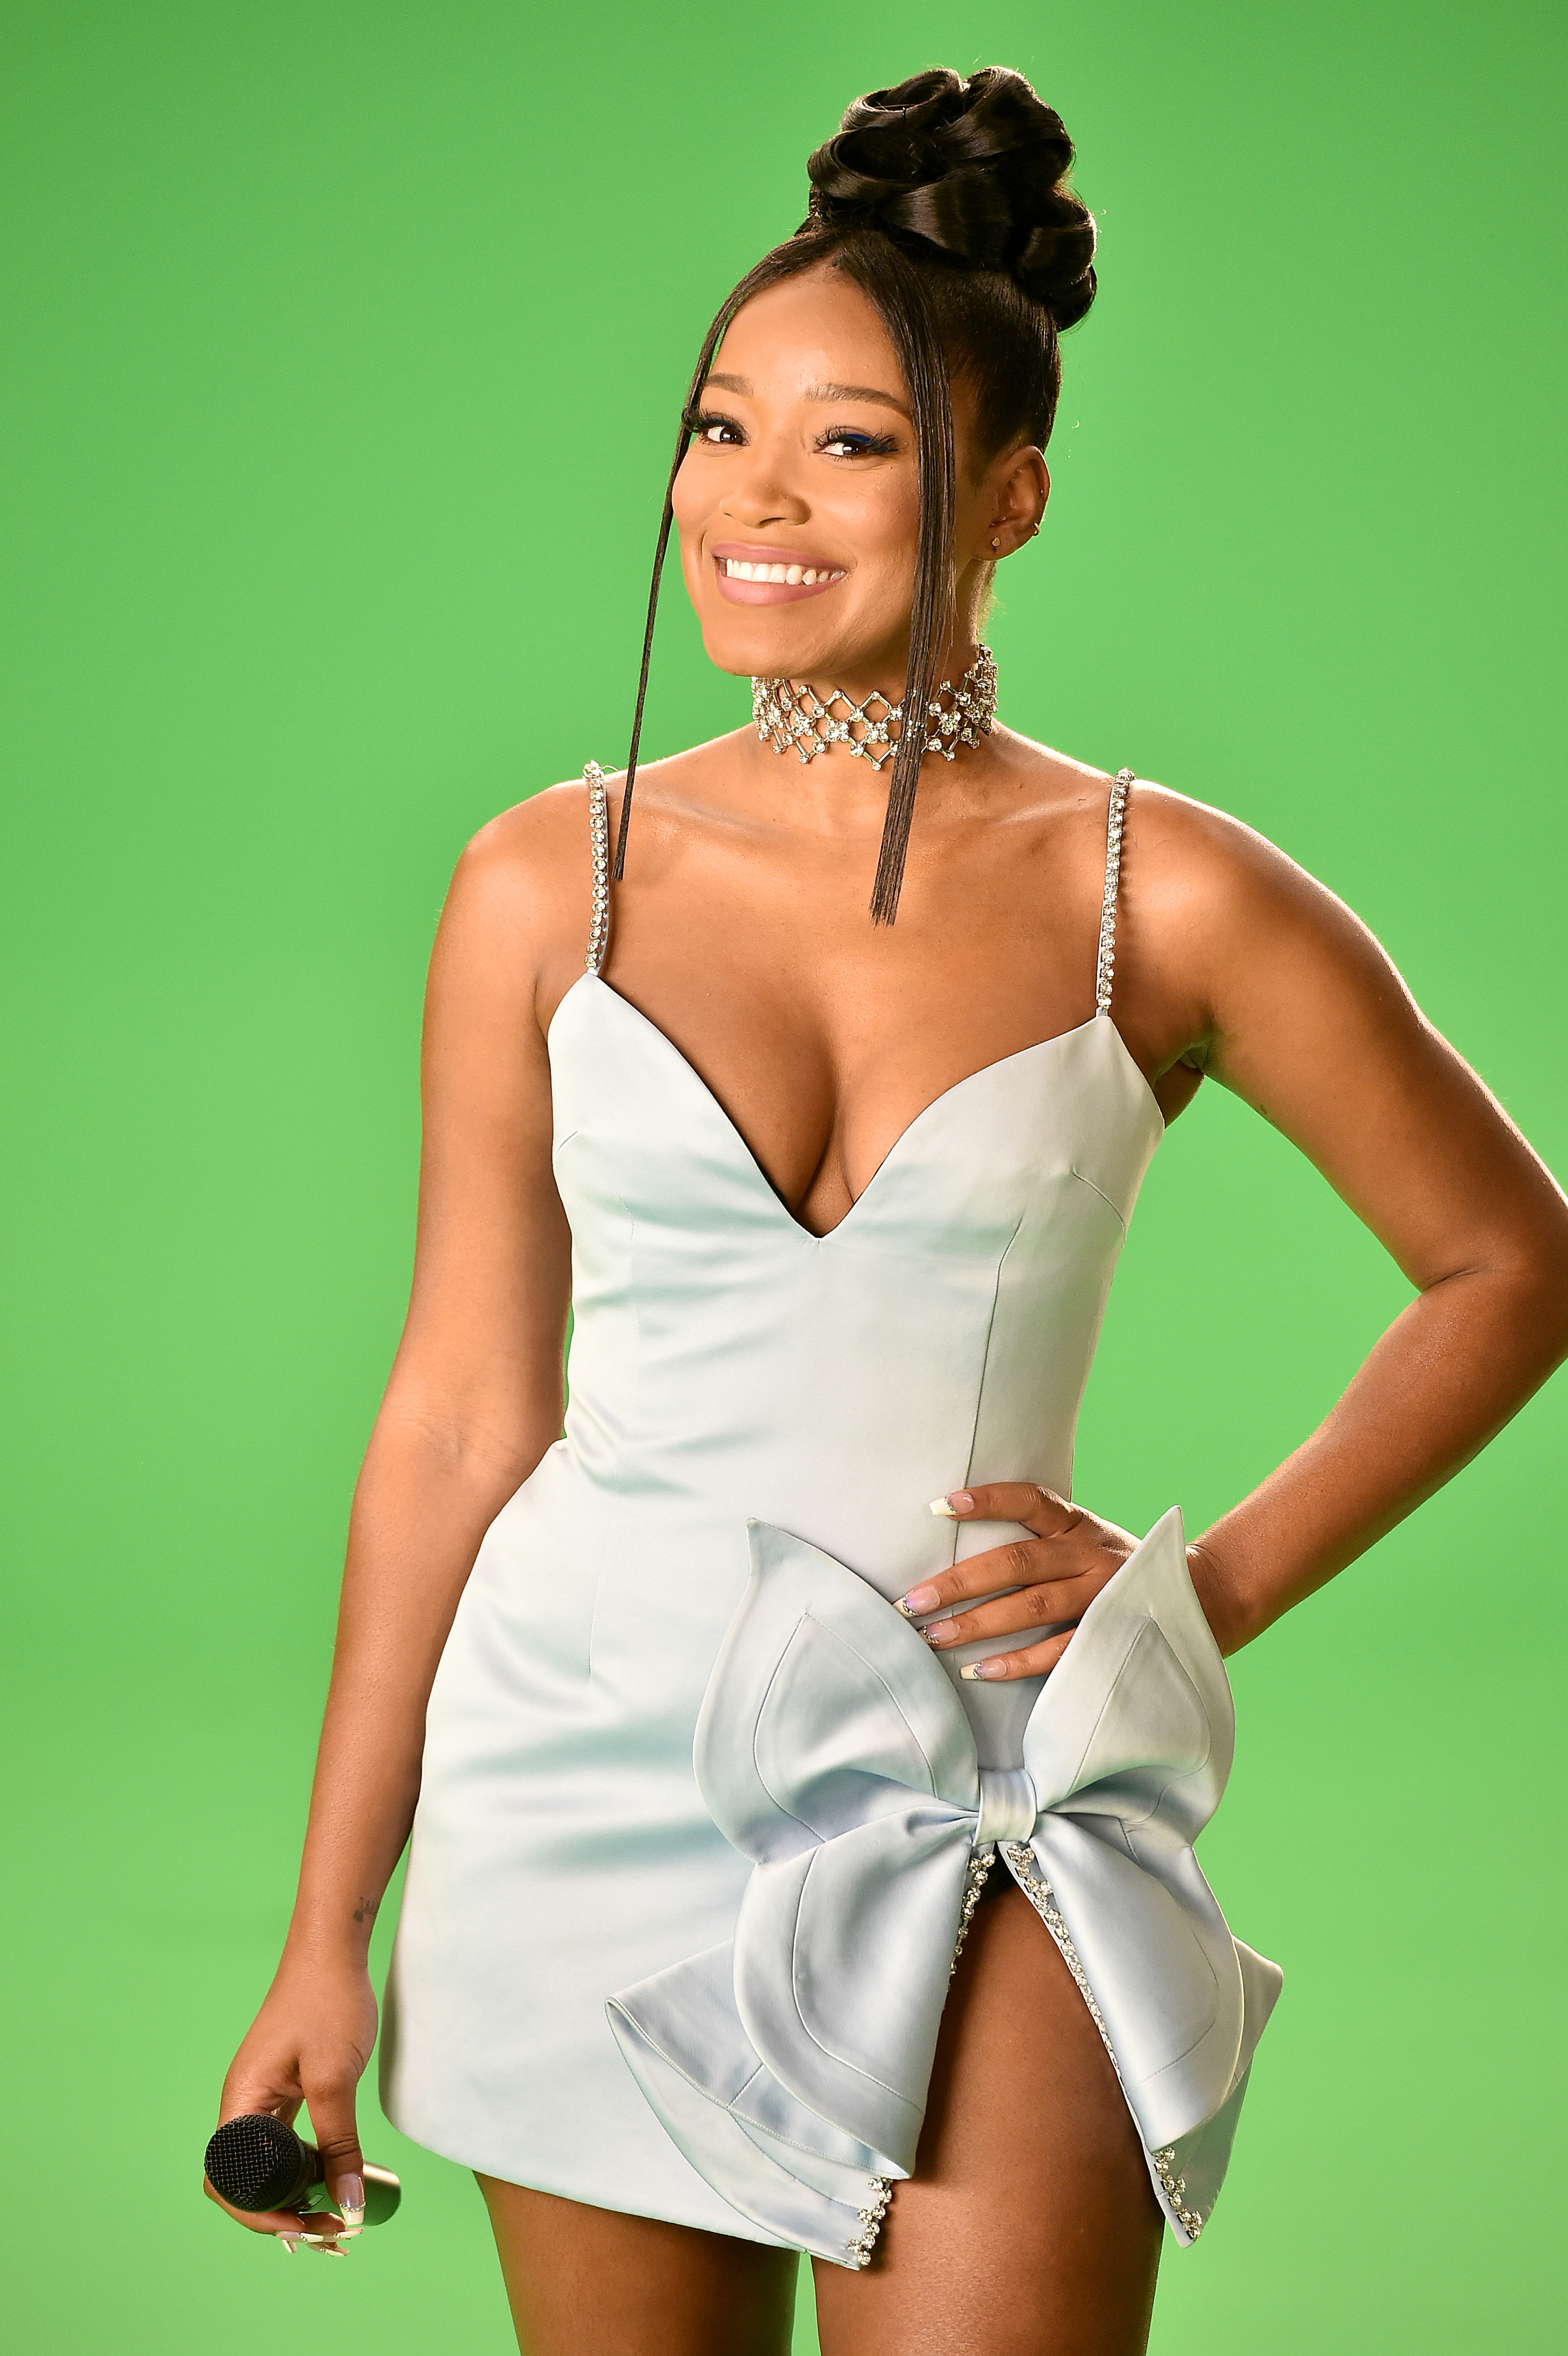 Keke Palmer attends the 2020 MTV Video Music Awards, broadcast on Sunday, August 30, 2020 in New York City